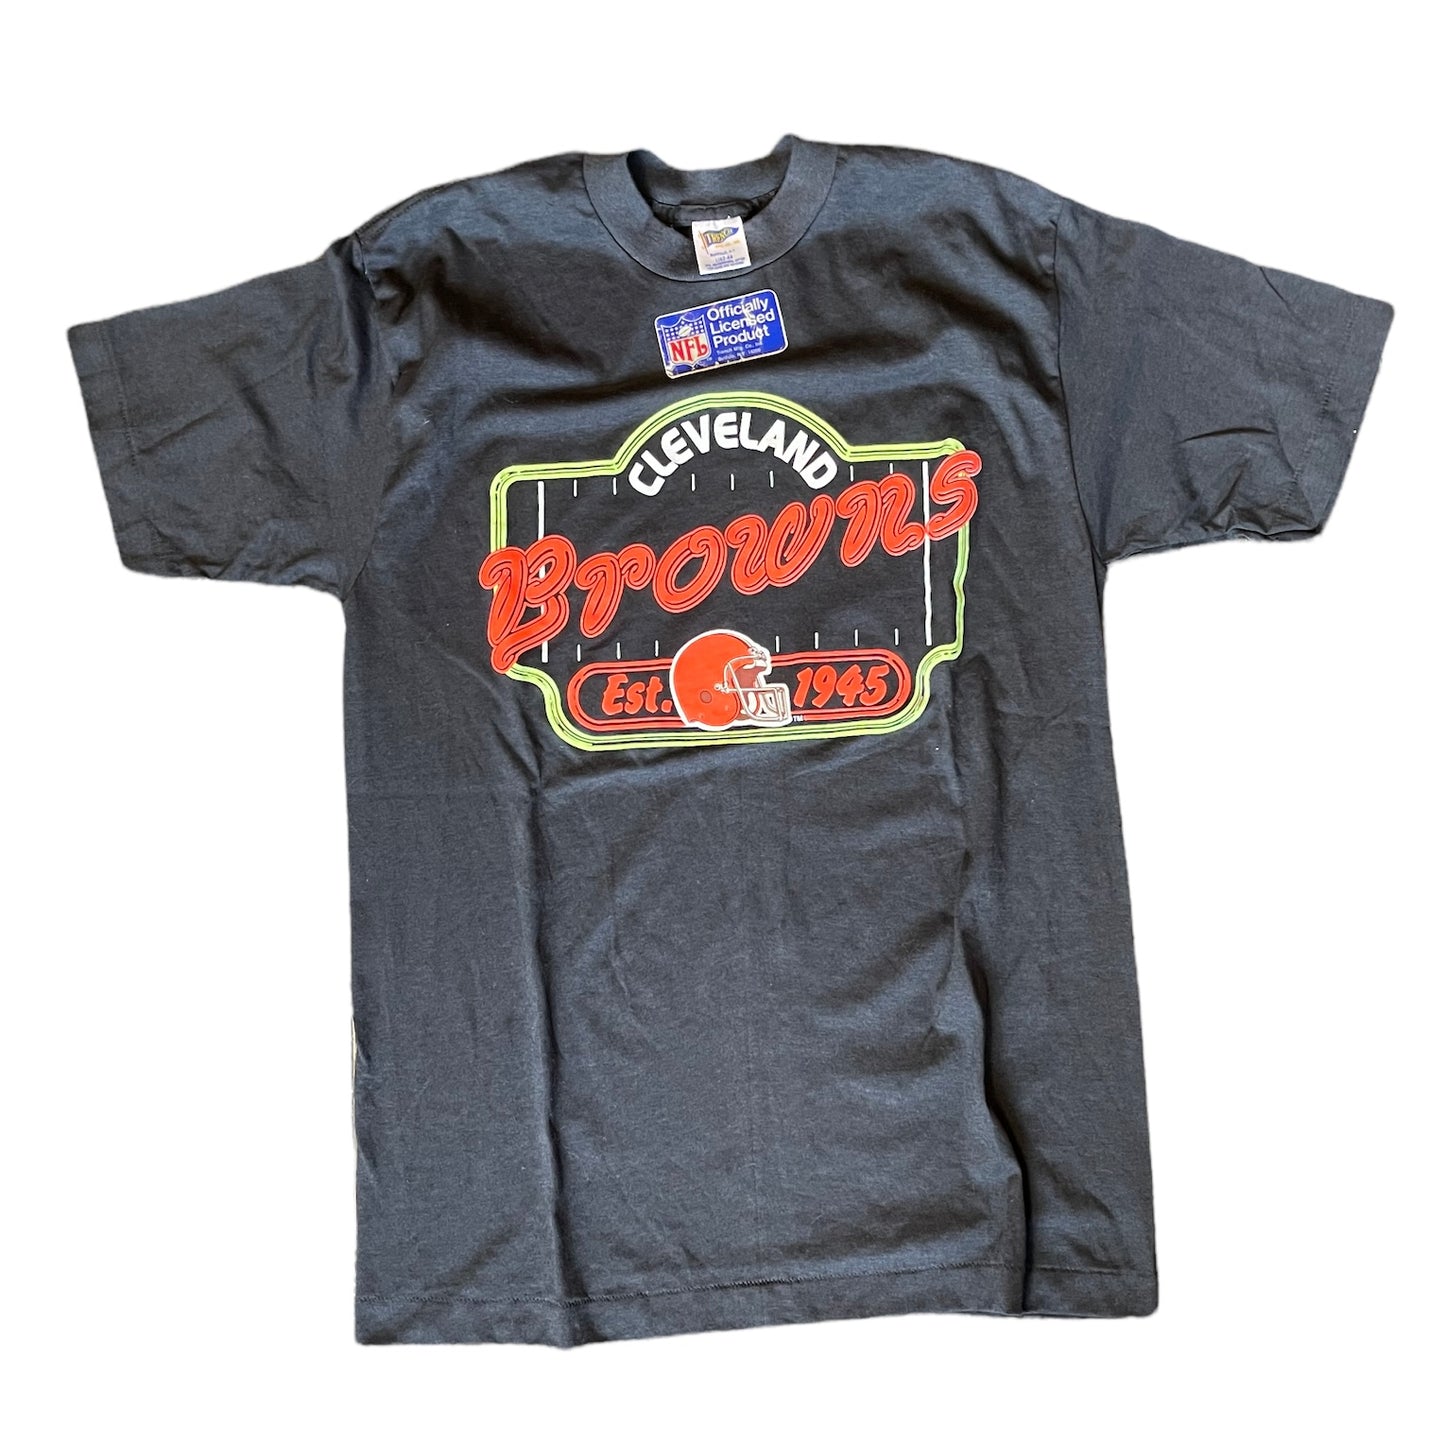 Vintage 1980s Cleveland Browns Graphic Shirt